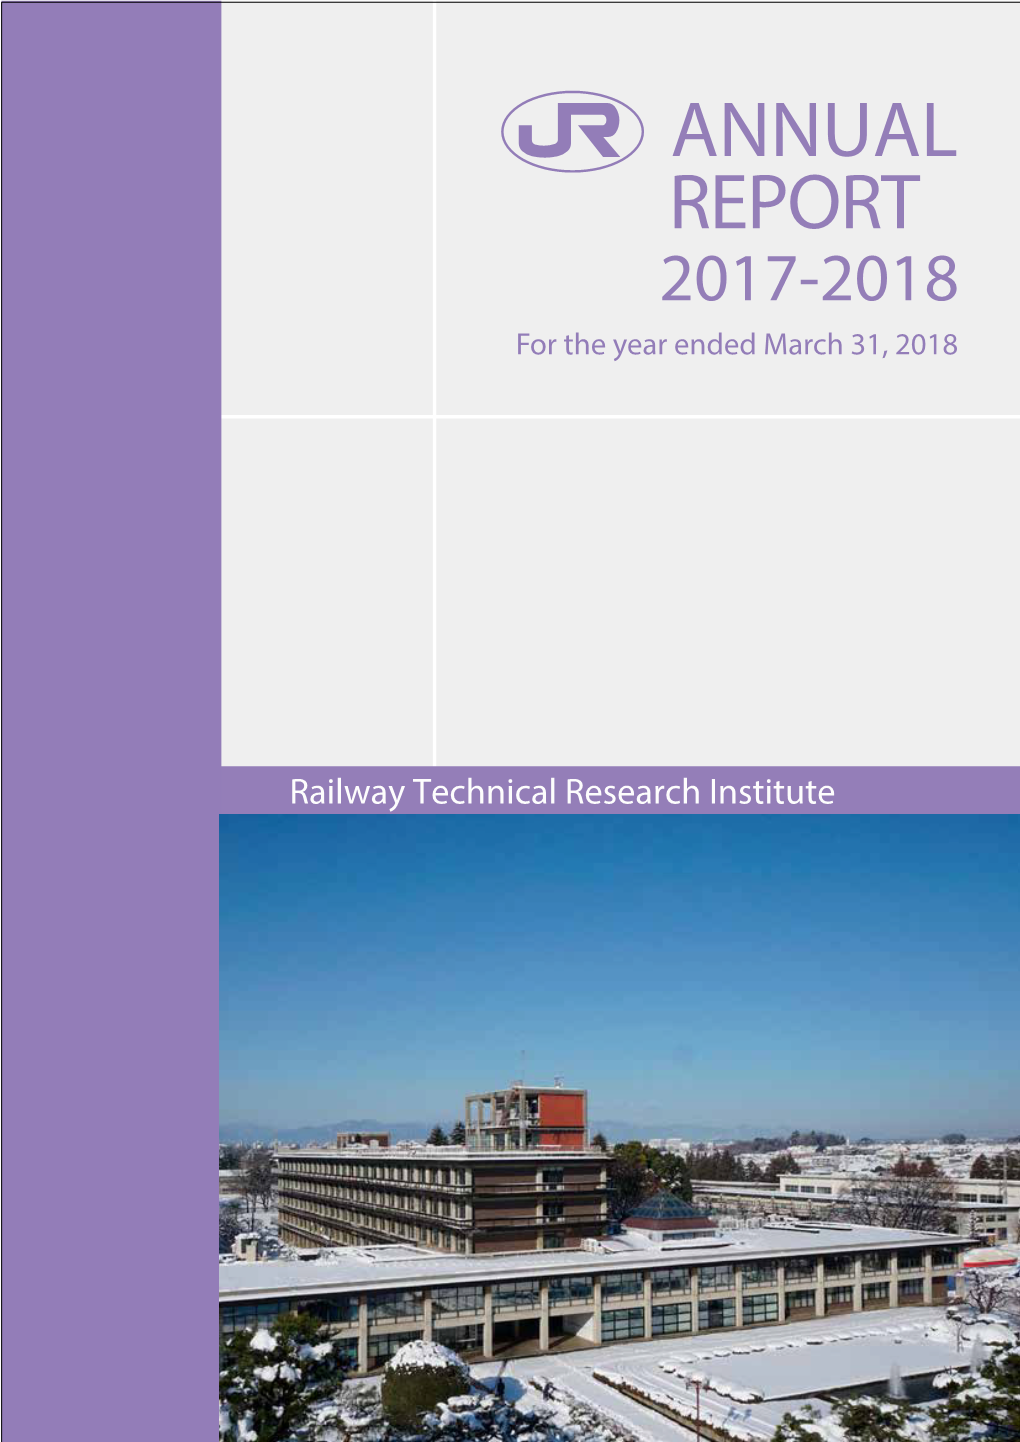 ANNUAL REPORT 2017-2018 for the Year Ended March 31, 2018